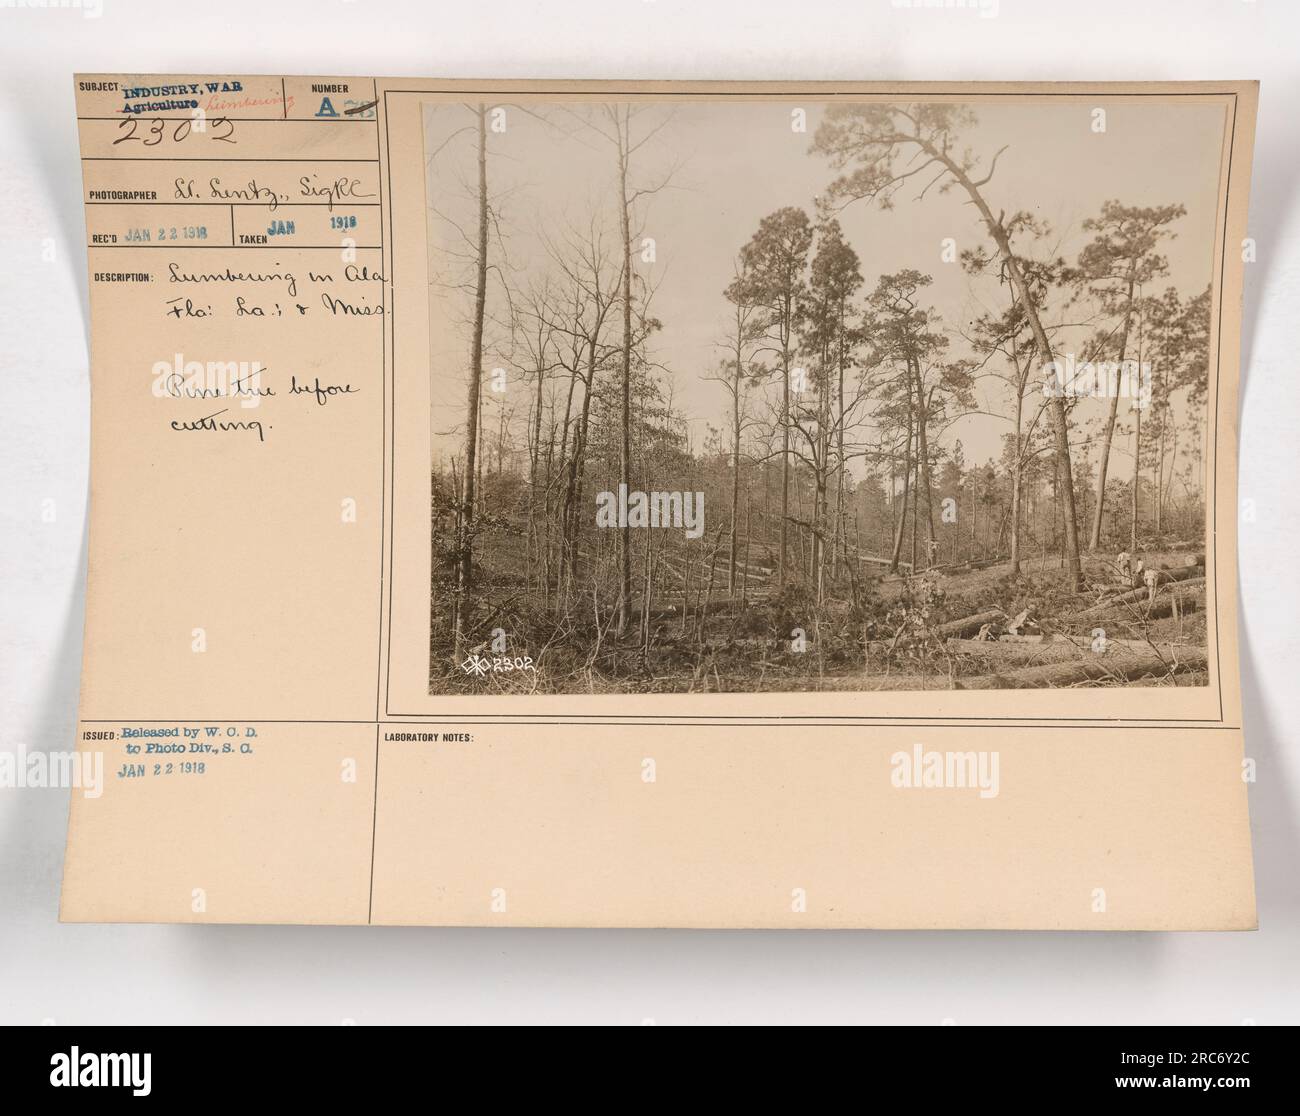 Image: A pine tree standing tall in a forest, with the surrounding area showing signs of logging activities. Caption: A pine tree in Alabama, Florida, Louisiana, and Mississippi, prior to being cut down during World War One for lumbering purposes. The image captures the scale of the forestry industry during wartime, highlighting the need for resources to support the war effort. Stock Photo